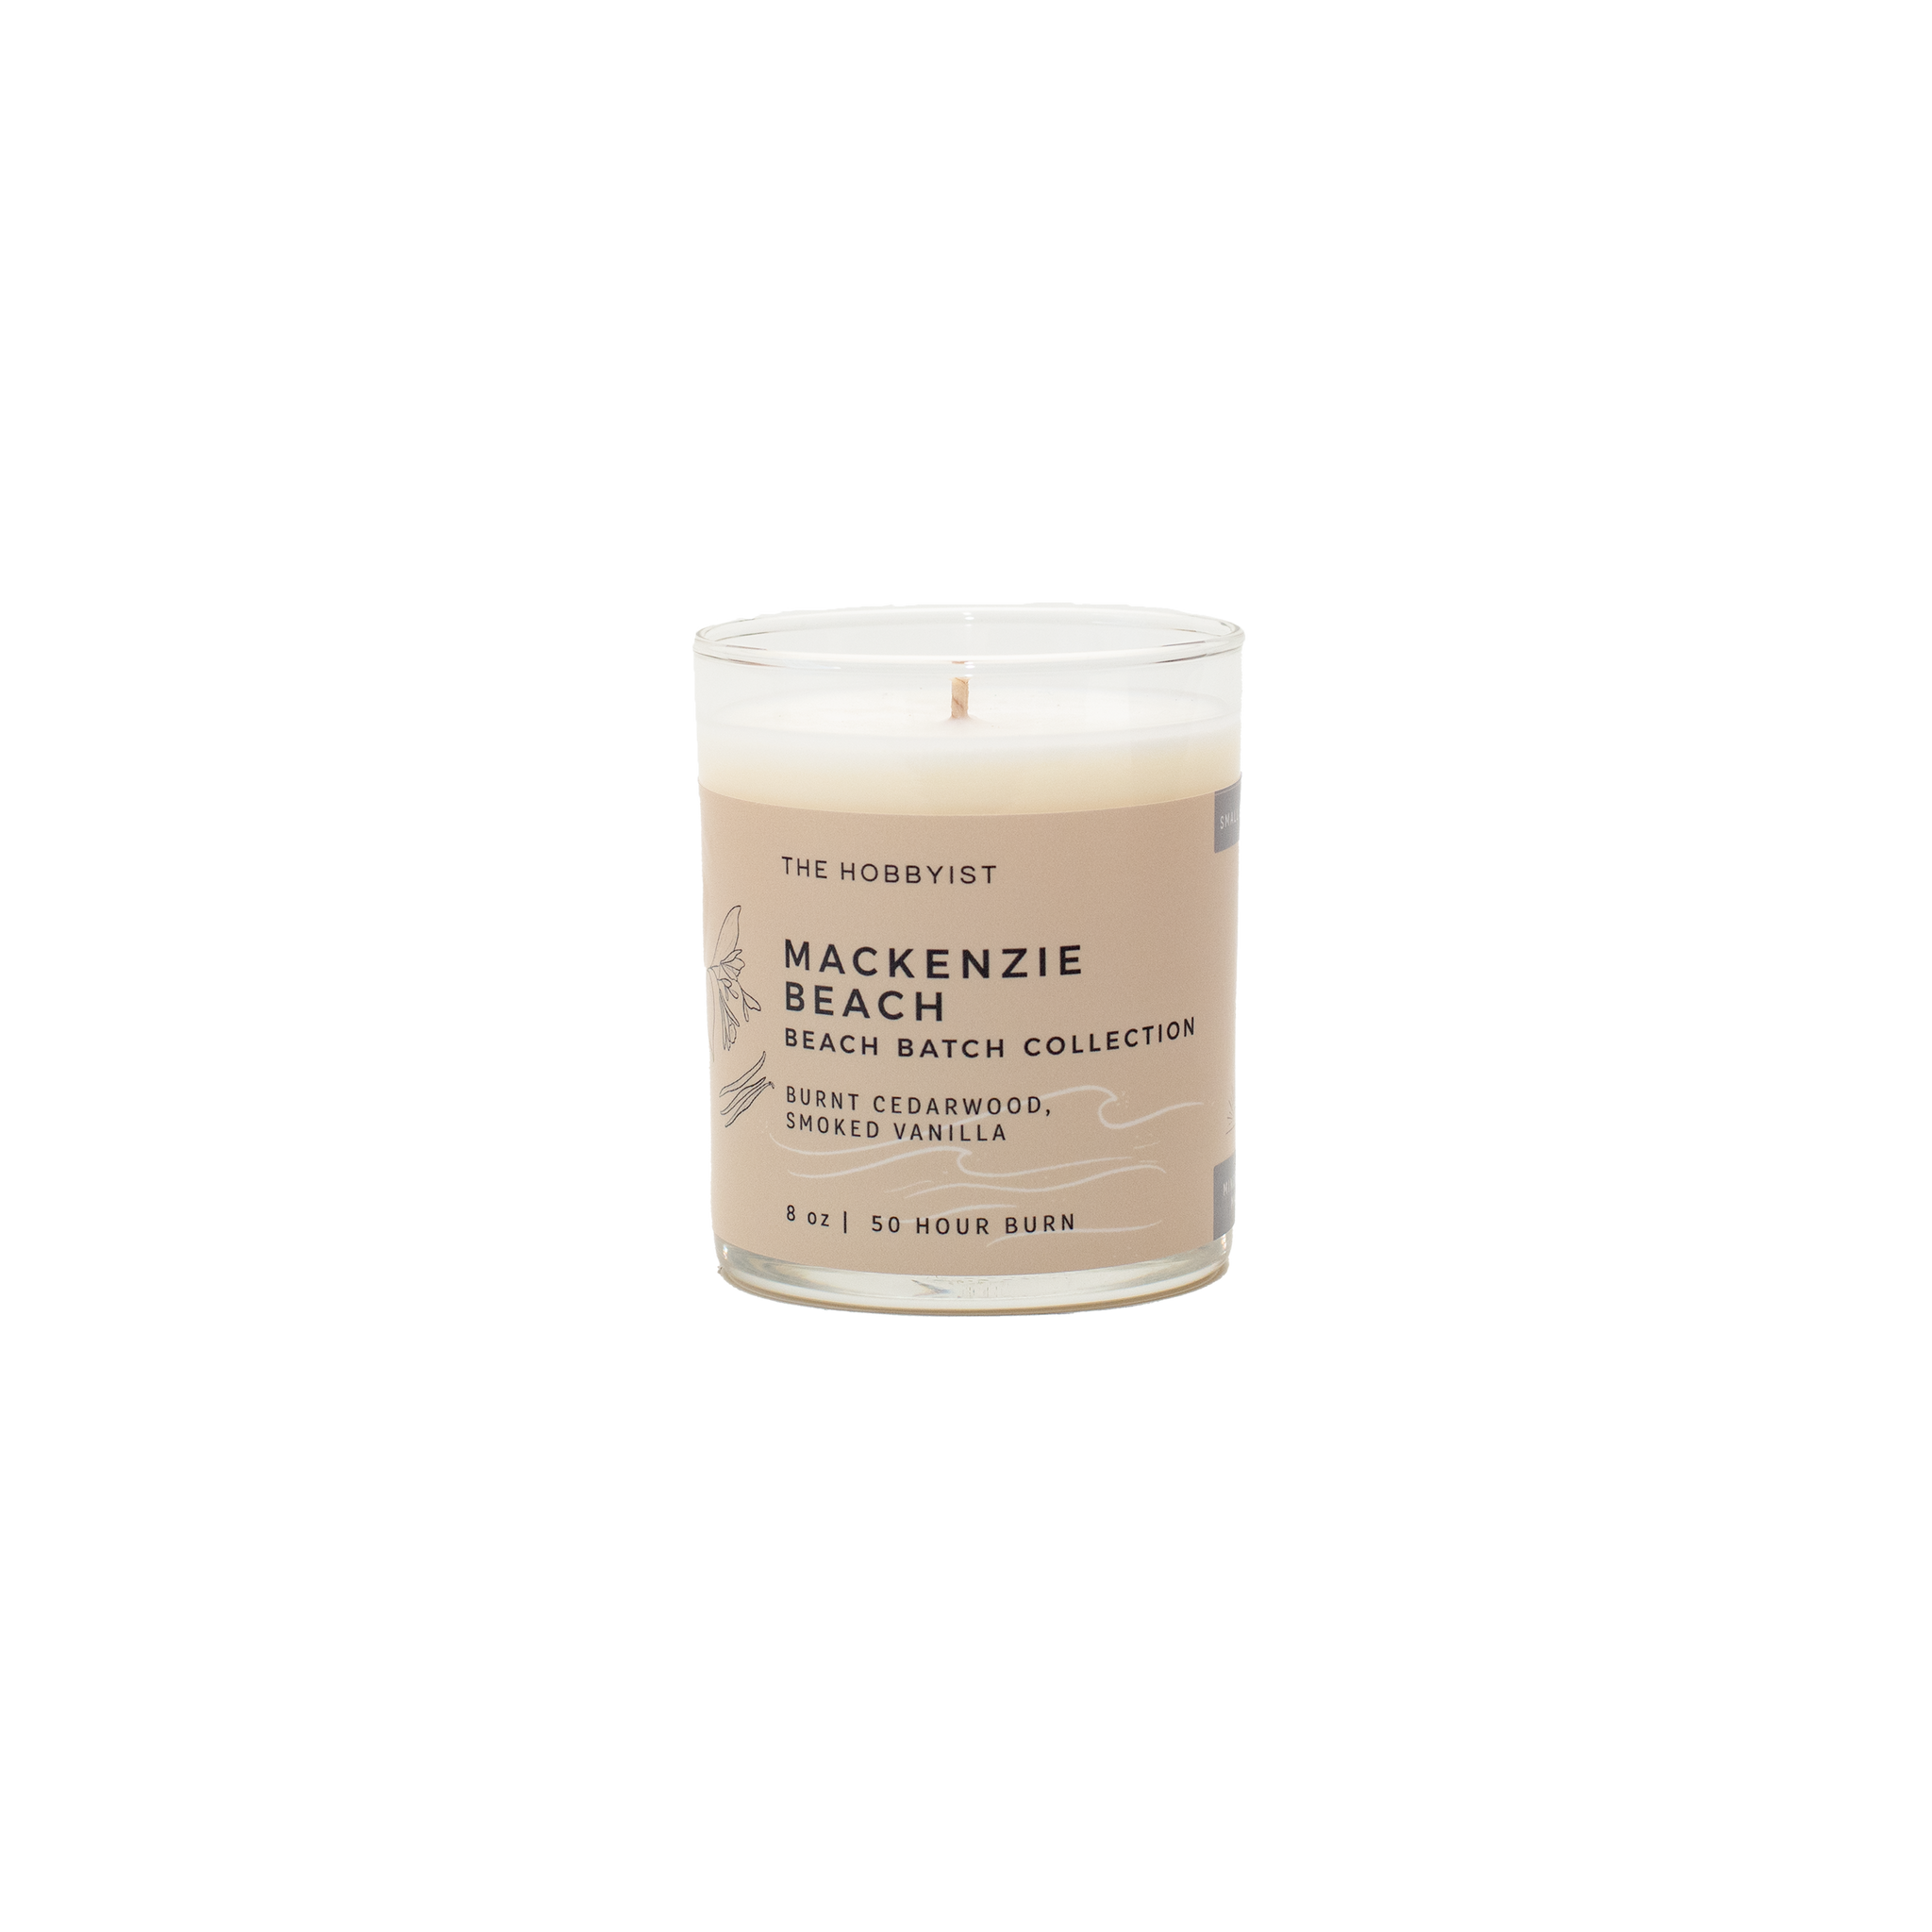 Product photo of the Mackenzie Beach Candle from our Beach Batch Collection